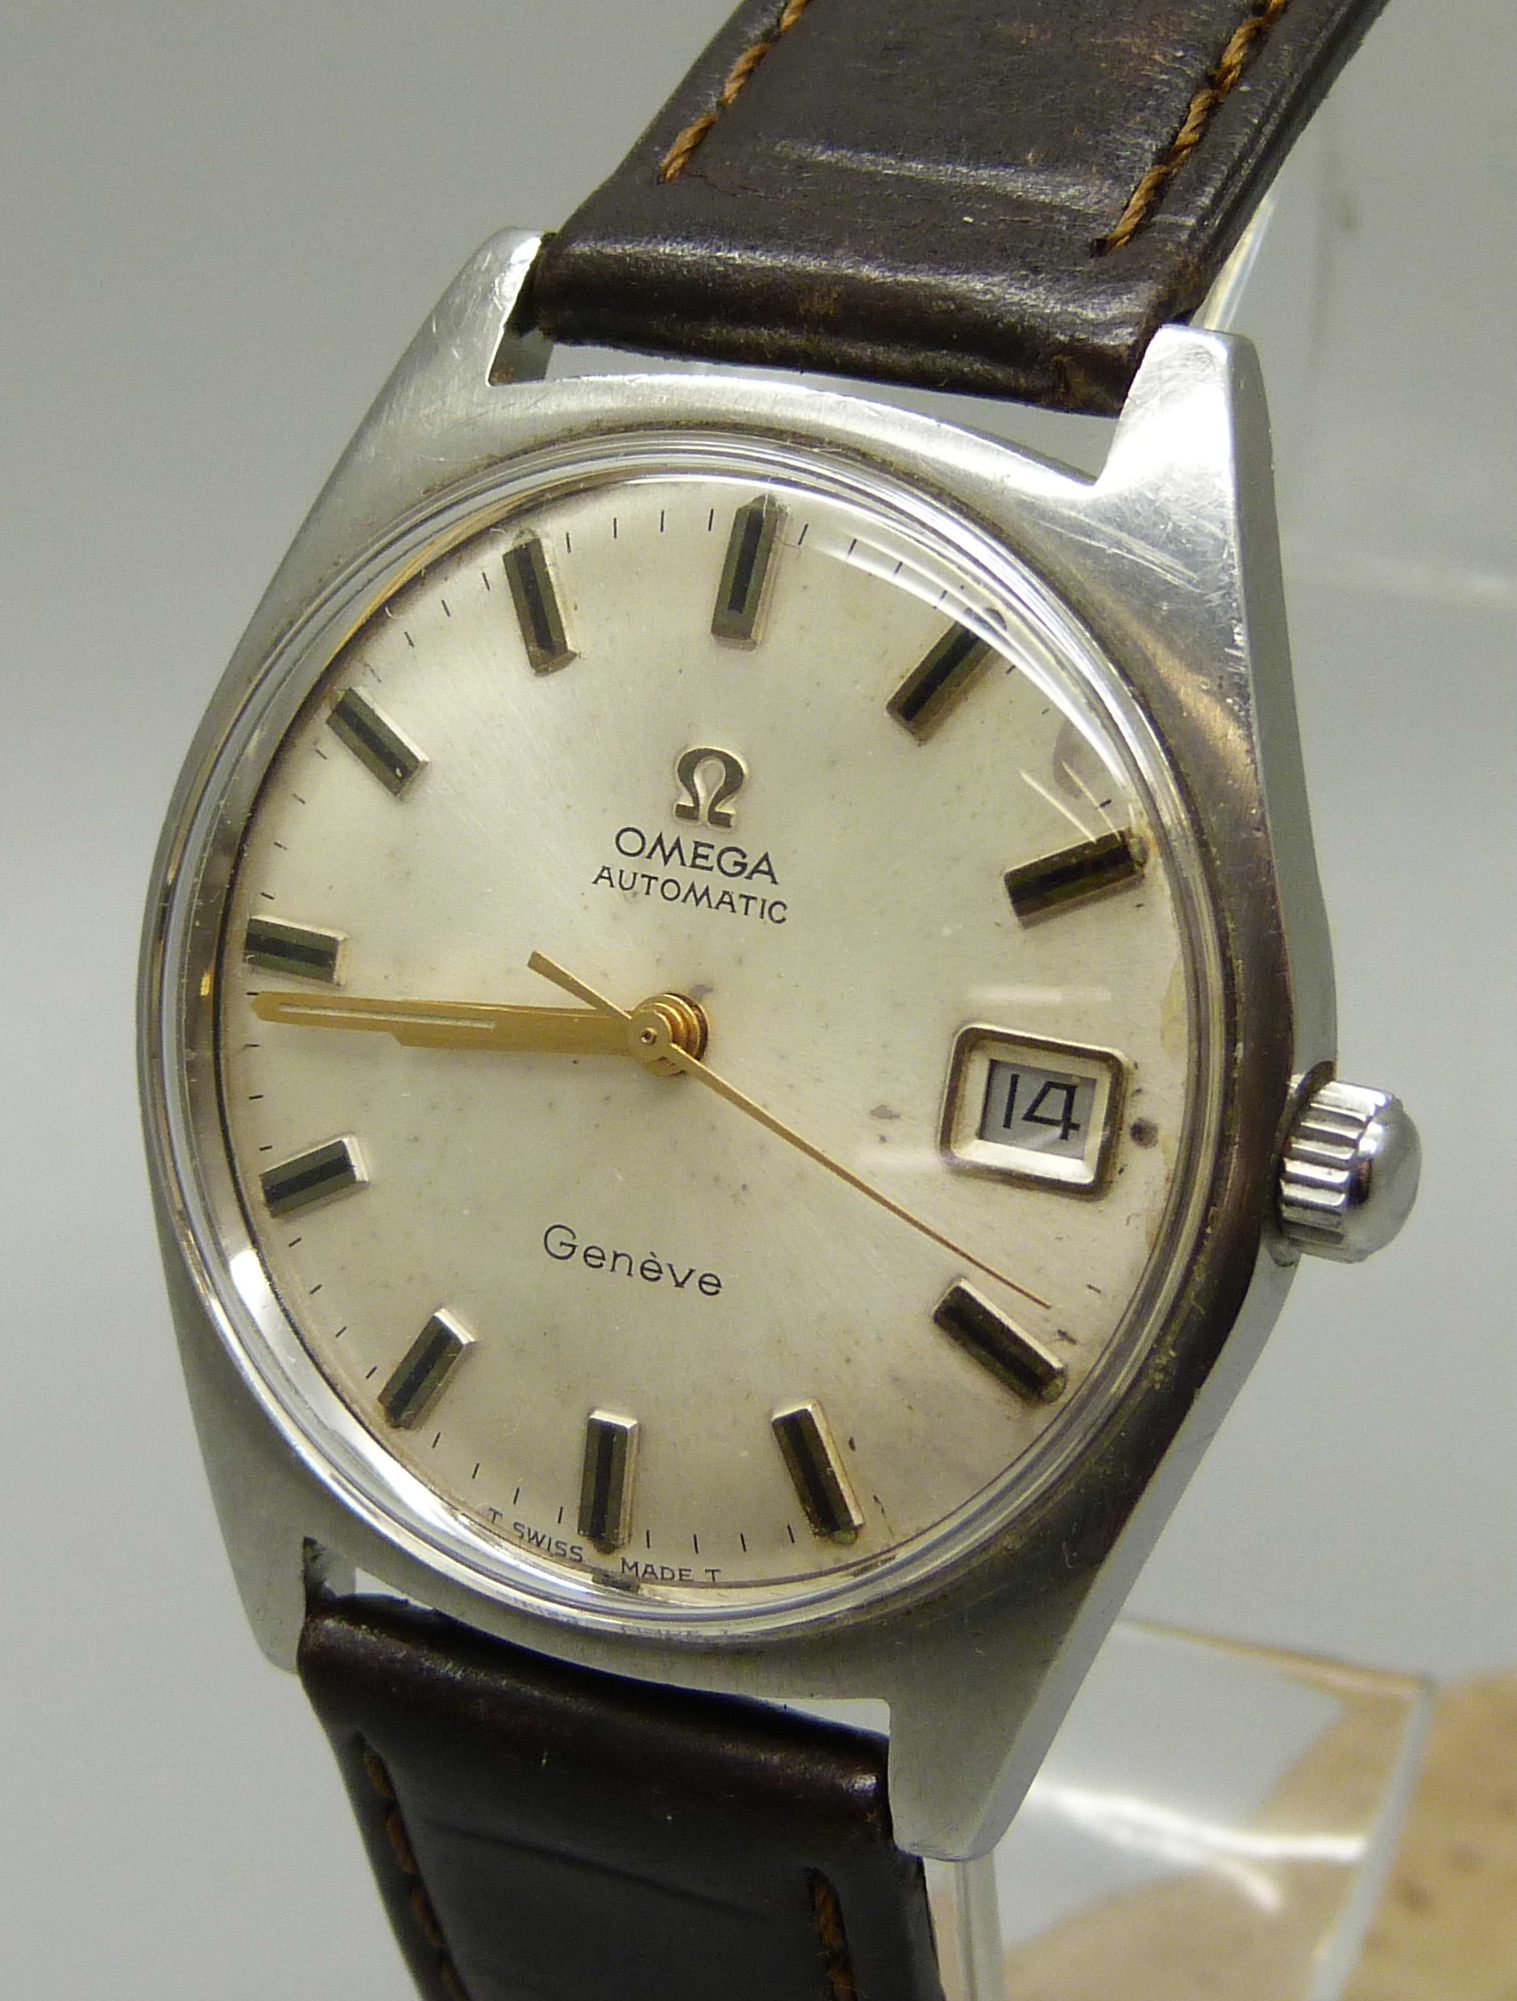 An Omega Geneve automatic date display wristwatch, with original buckle and an Omega carrier box - Image 3 of 6